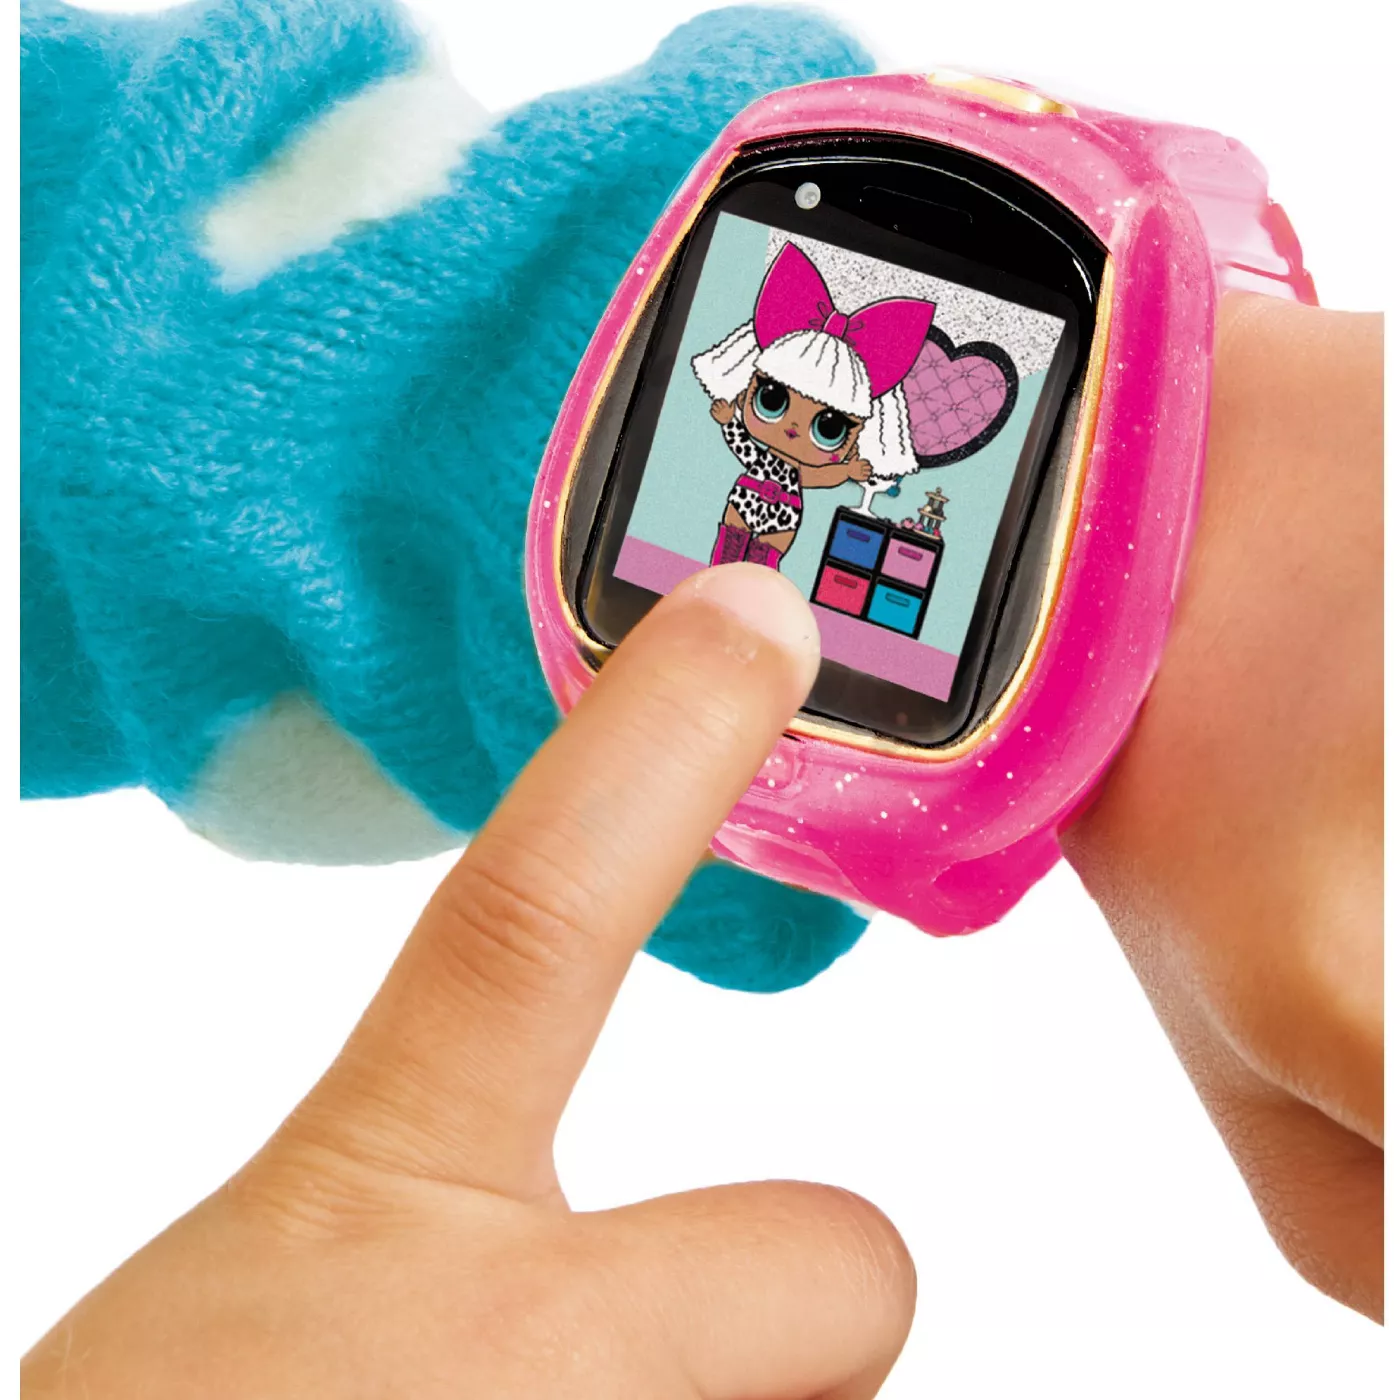 L.O.L. Surprise! Smartwatch! Pink -  Camera, Video, Games, Activities and More - £15.72 GBP